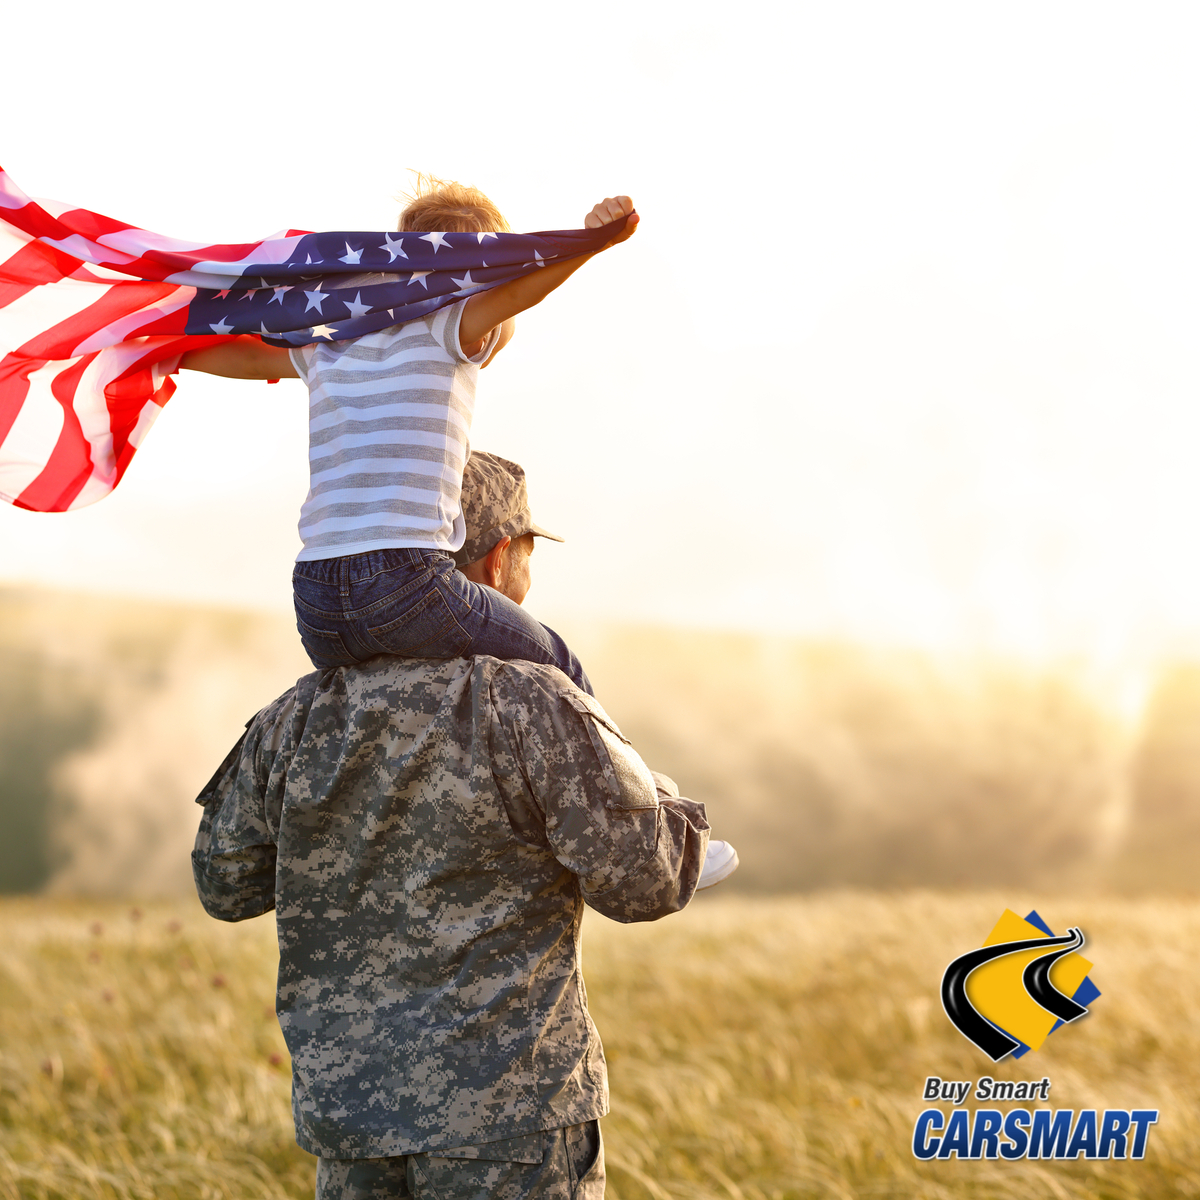 The Best Auto Loans for Military Personnel Near Arlington